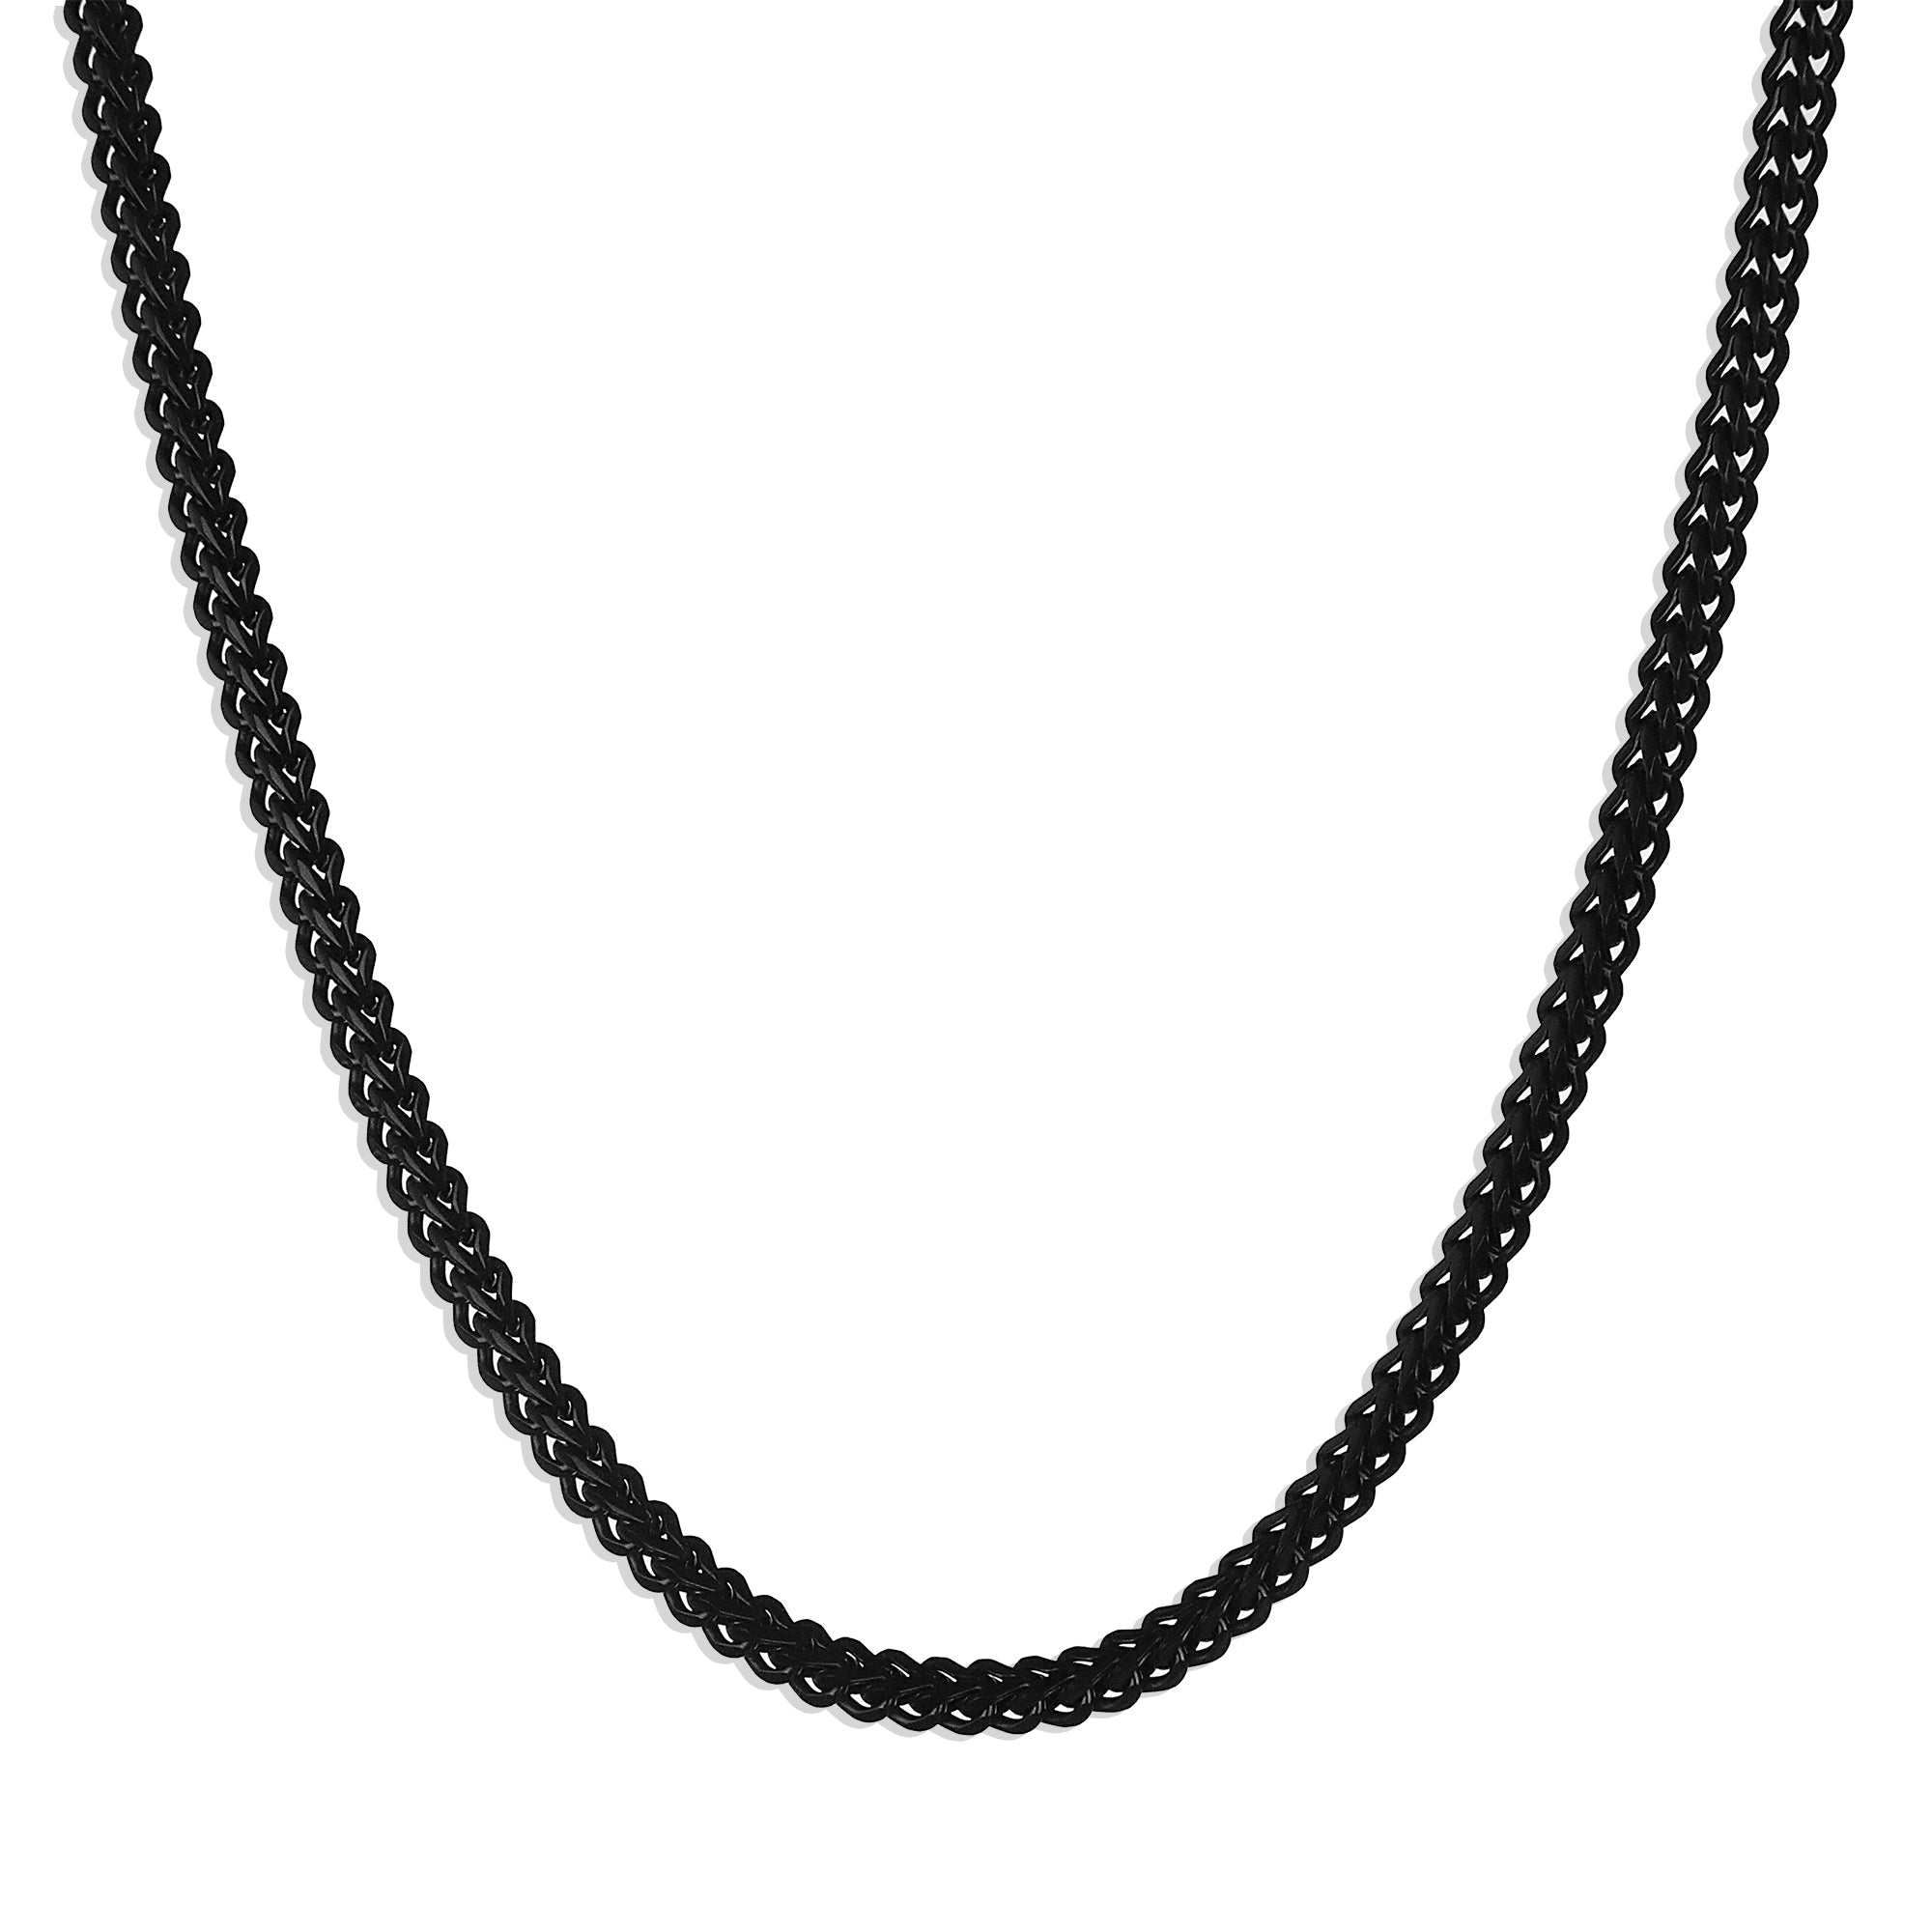 Men's Black Chain Necklace Thick Box Chain Necklace 3.5mm Waterproof Chain  Stainless Steel Chain Black Jewelry by Modern Out 